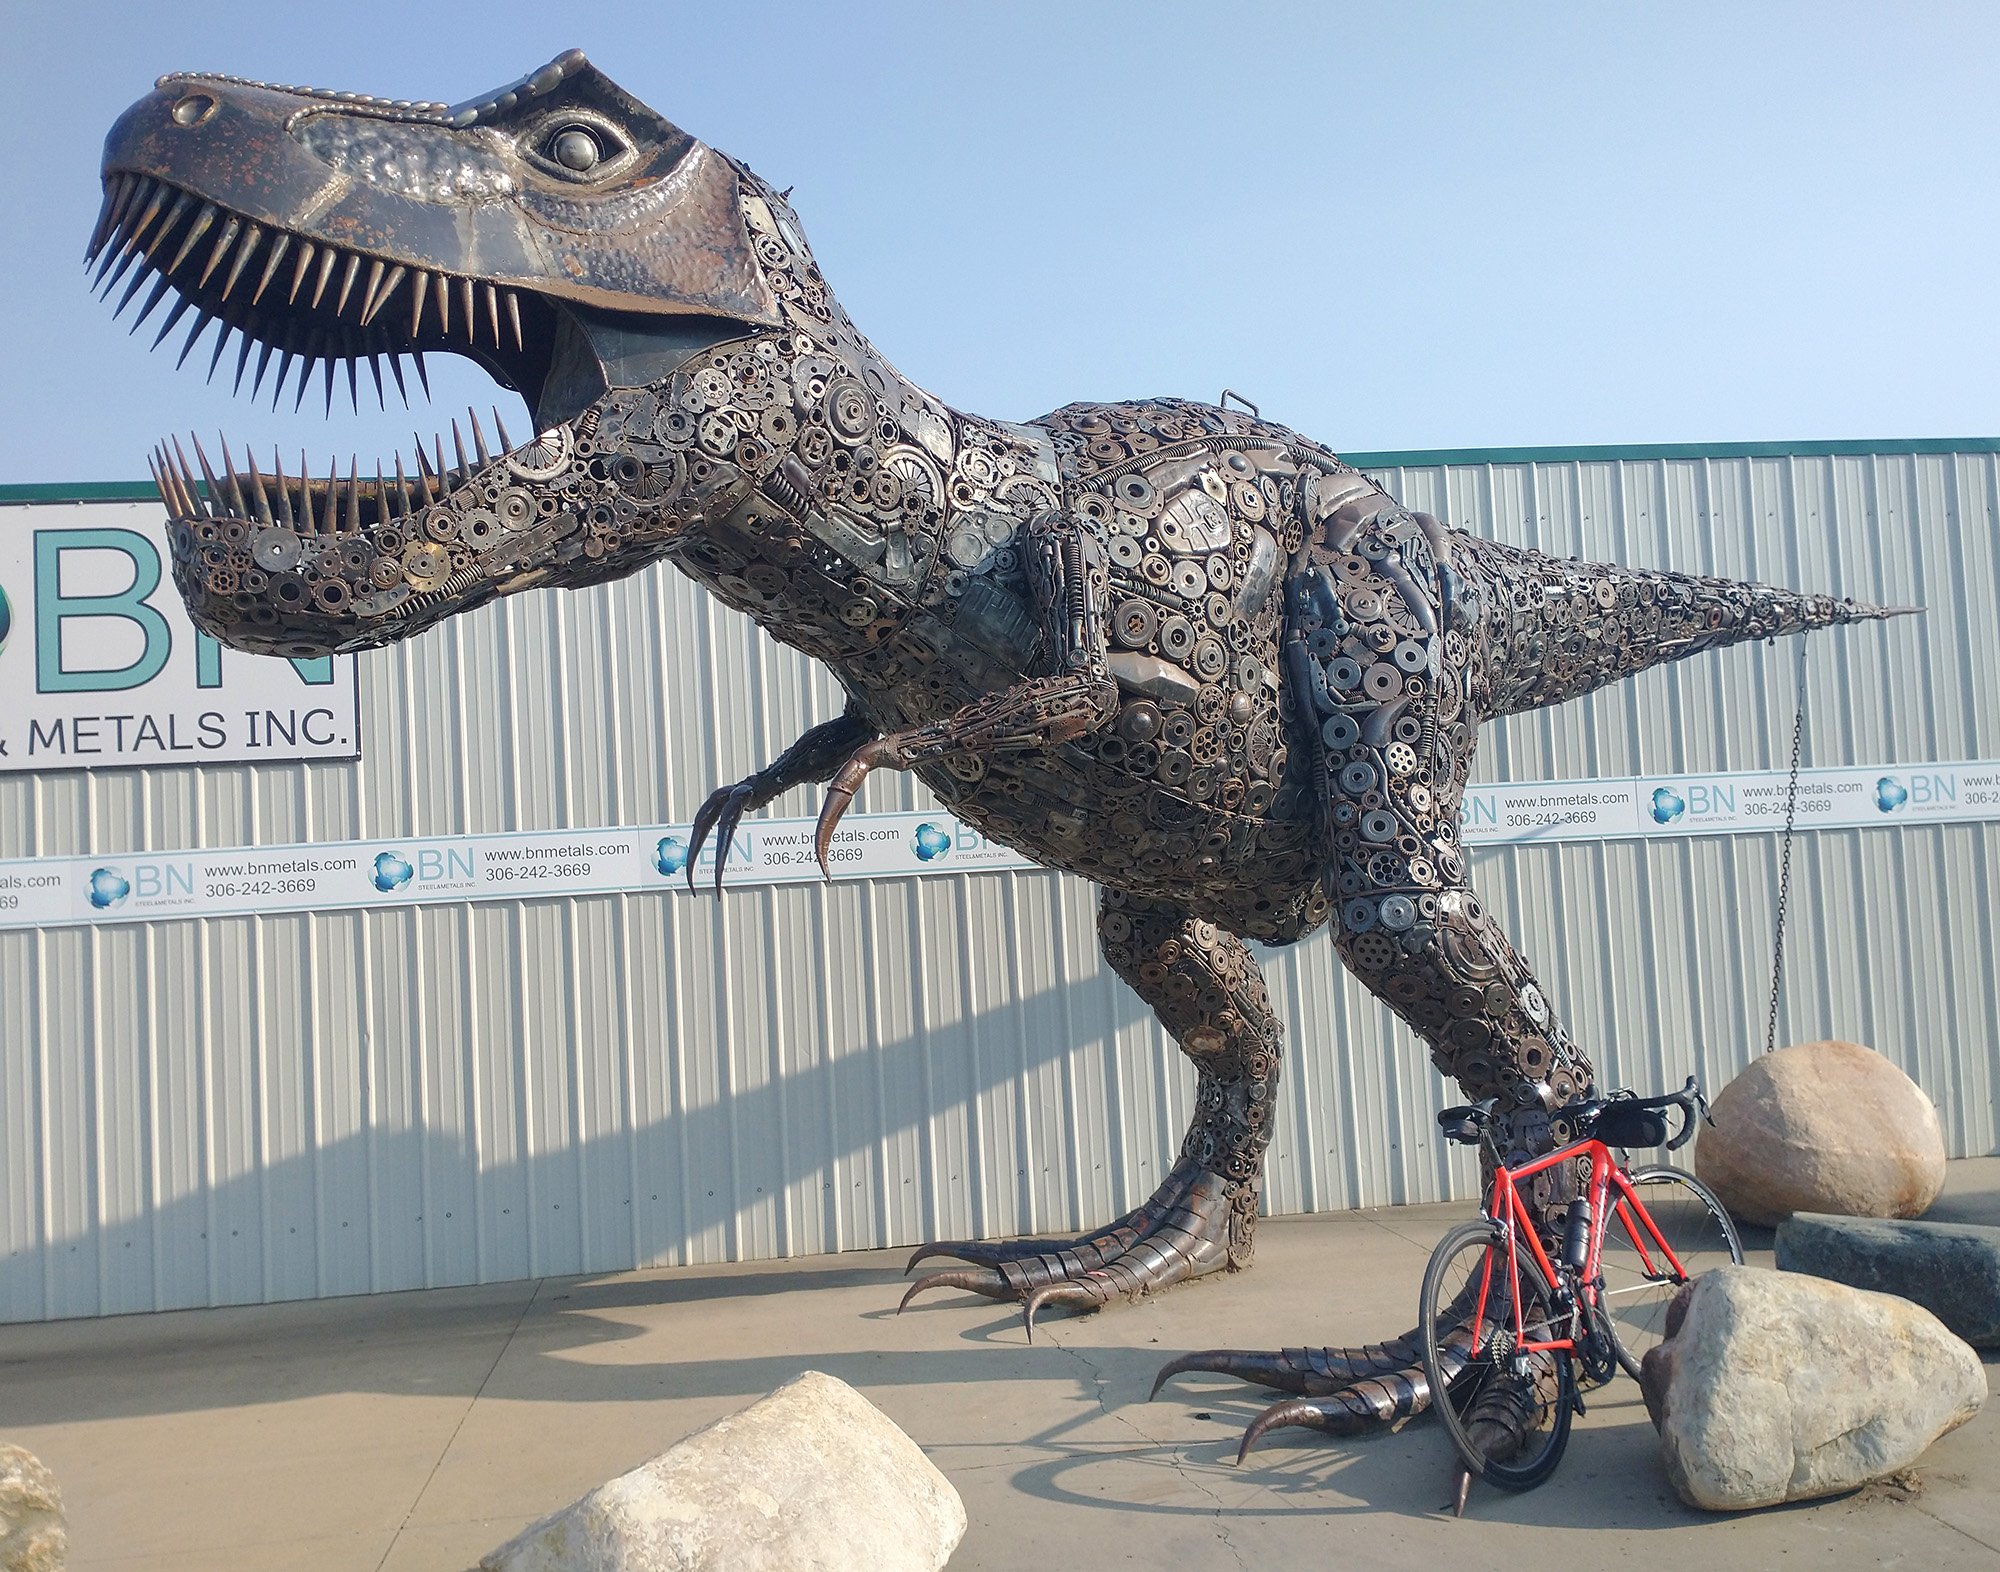 This junkyard had a JunkaSaurus. Easily one of the coolest statues I've seen on the trip. 